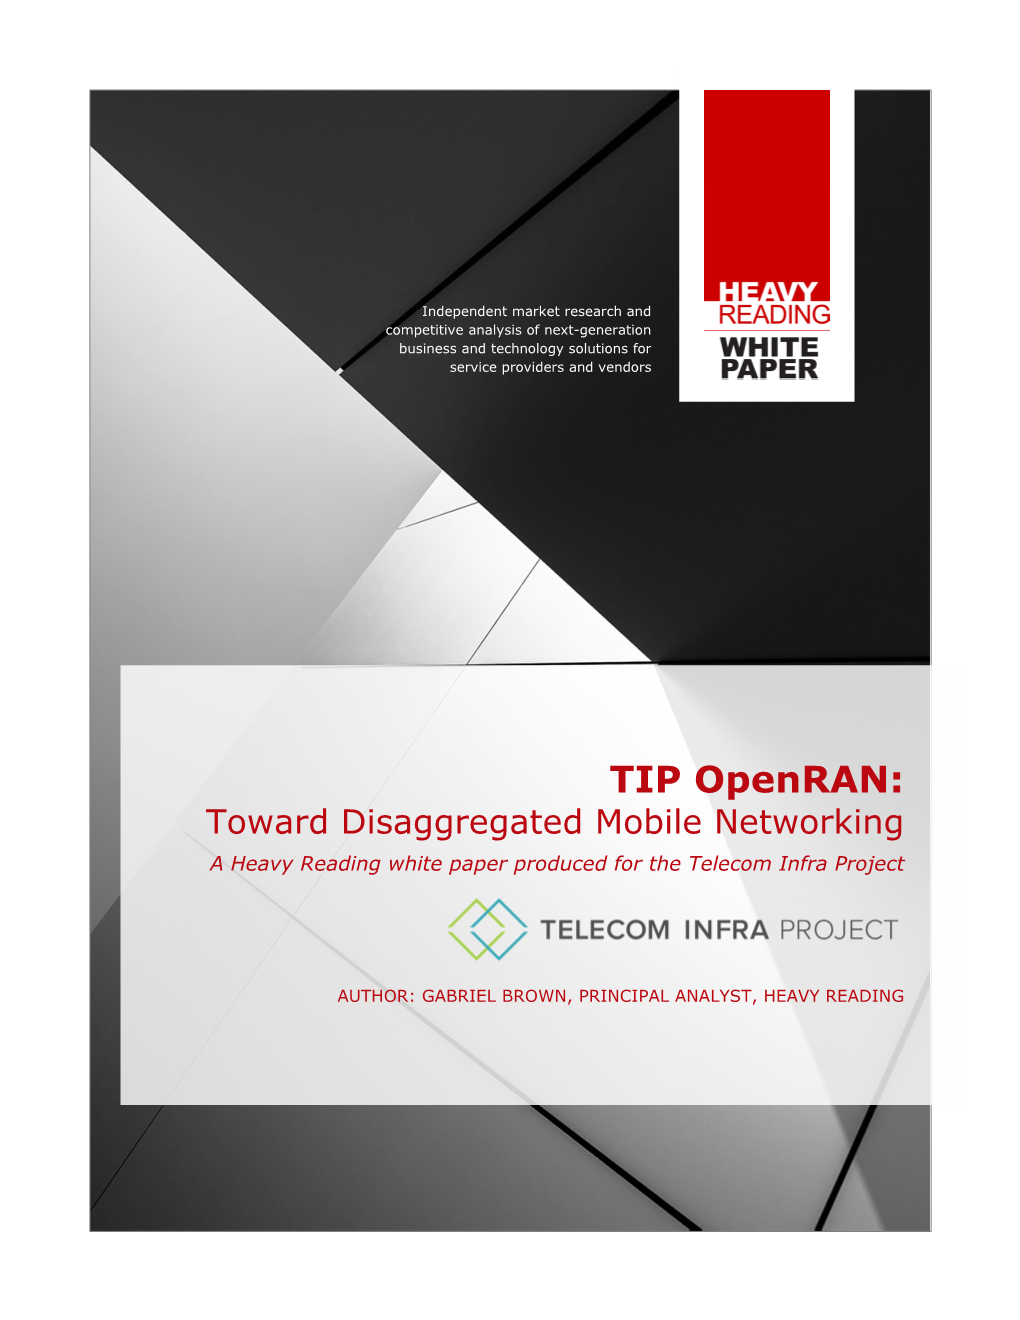 TIP Openran: Toward Disaggregated Mobile Networking a Heavy Reading White Paper Produced for the Telecom Infra Project